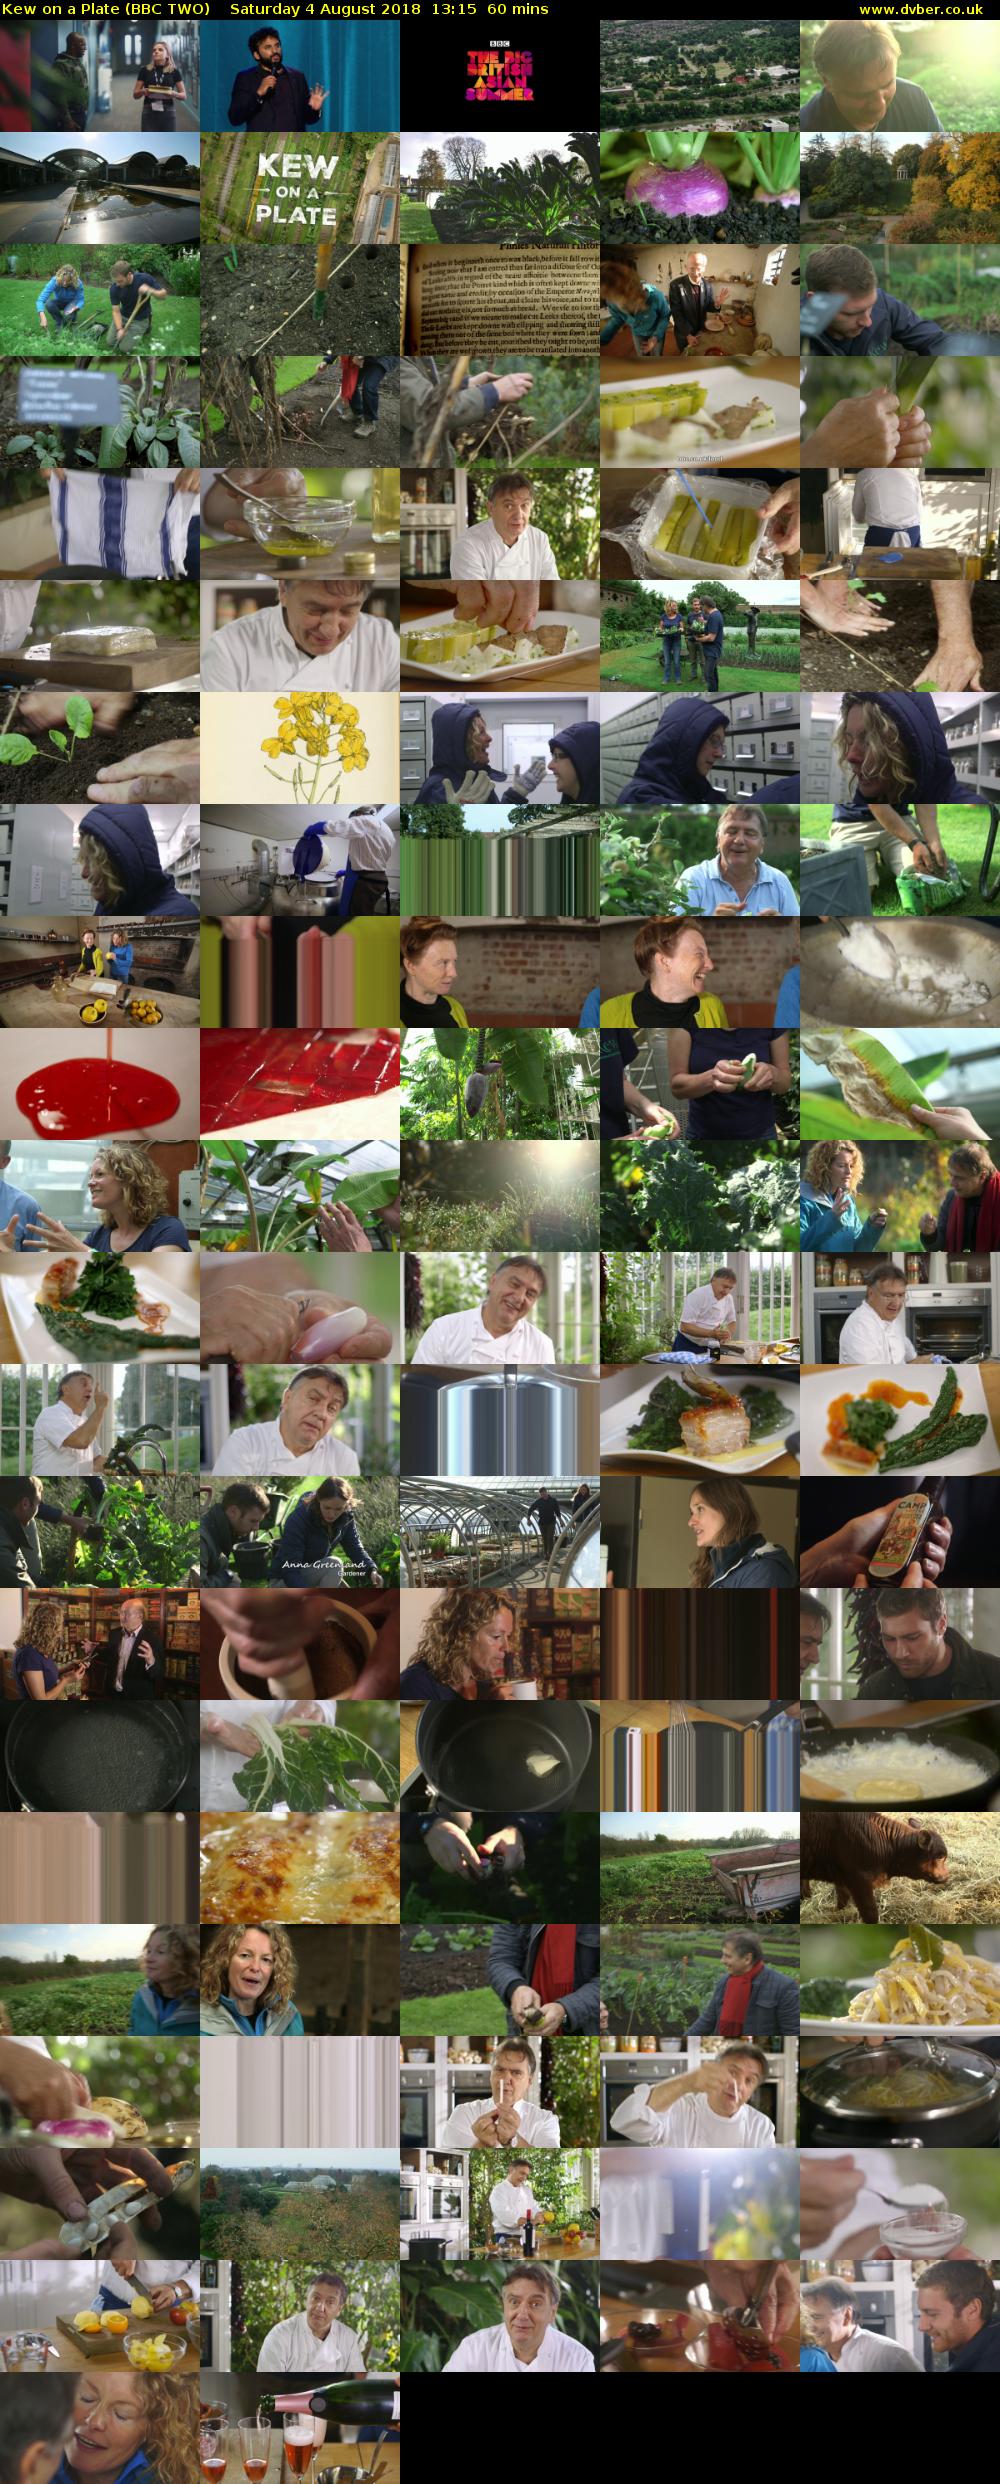 Kew on a Plate (BBC TWO) Saturday 4 August 2018 13:15 - 14:15